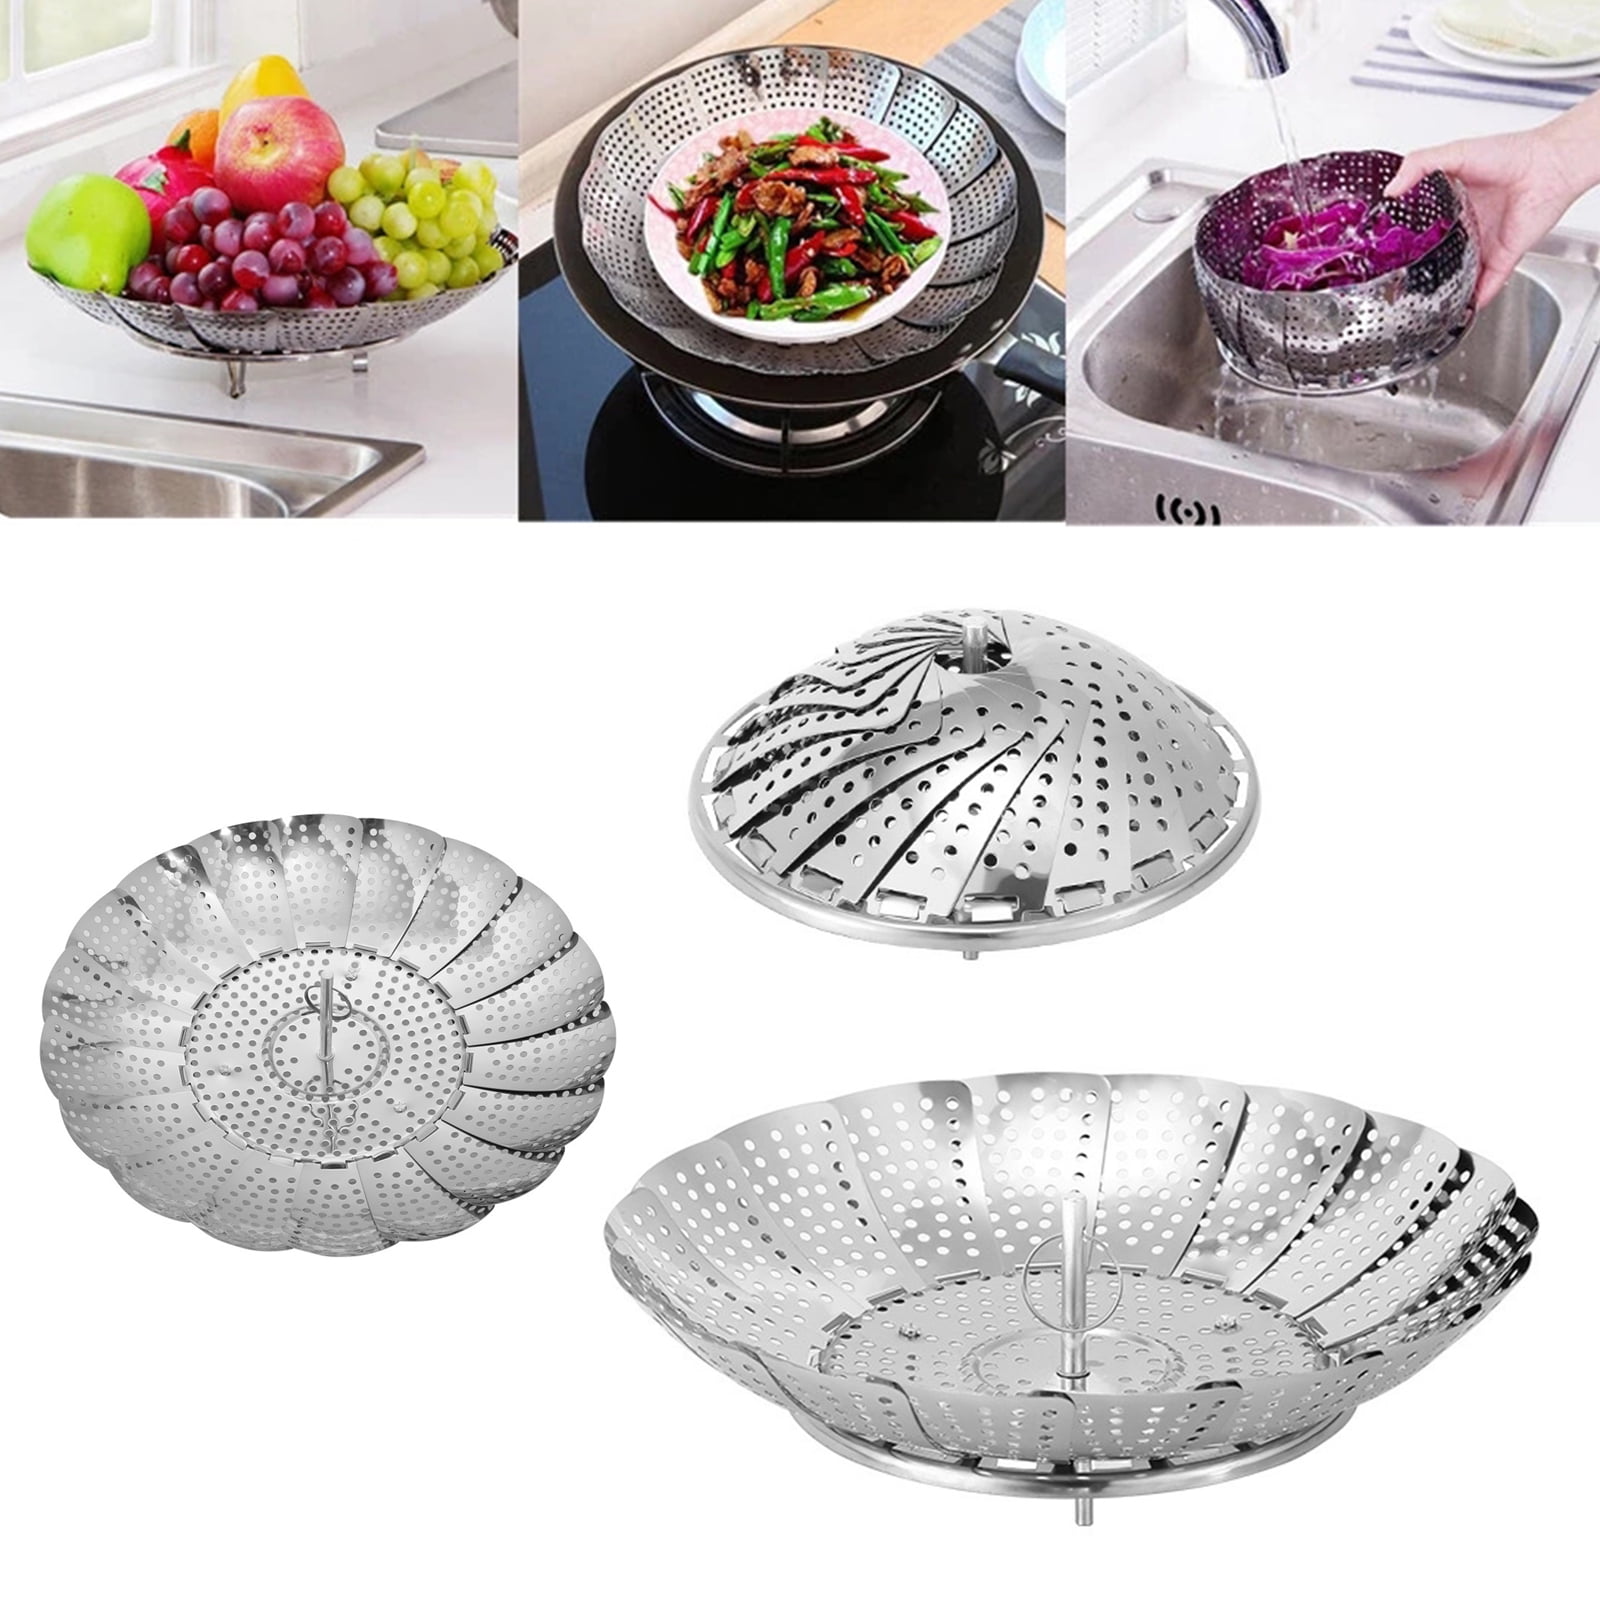 Pro Chef Kitchen Tools Stainless Steel Vegetable Steamer Basket - Set of 2  Collapsible Folding Steamers to Fit All Instant Pot Pressure Cookers and  Stove Top Pots for Perfect Veggies – Pro